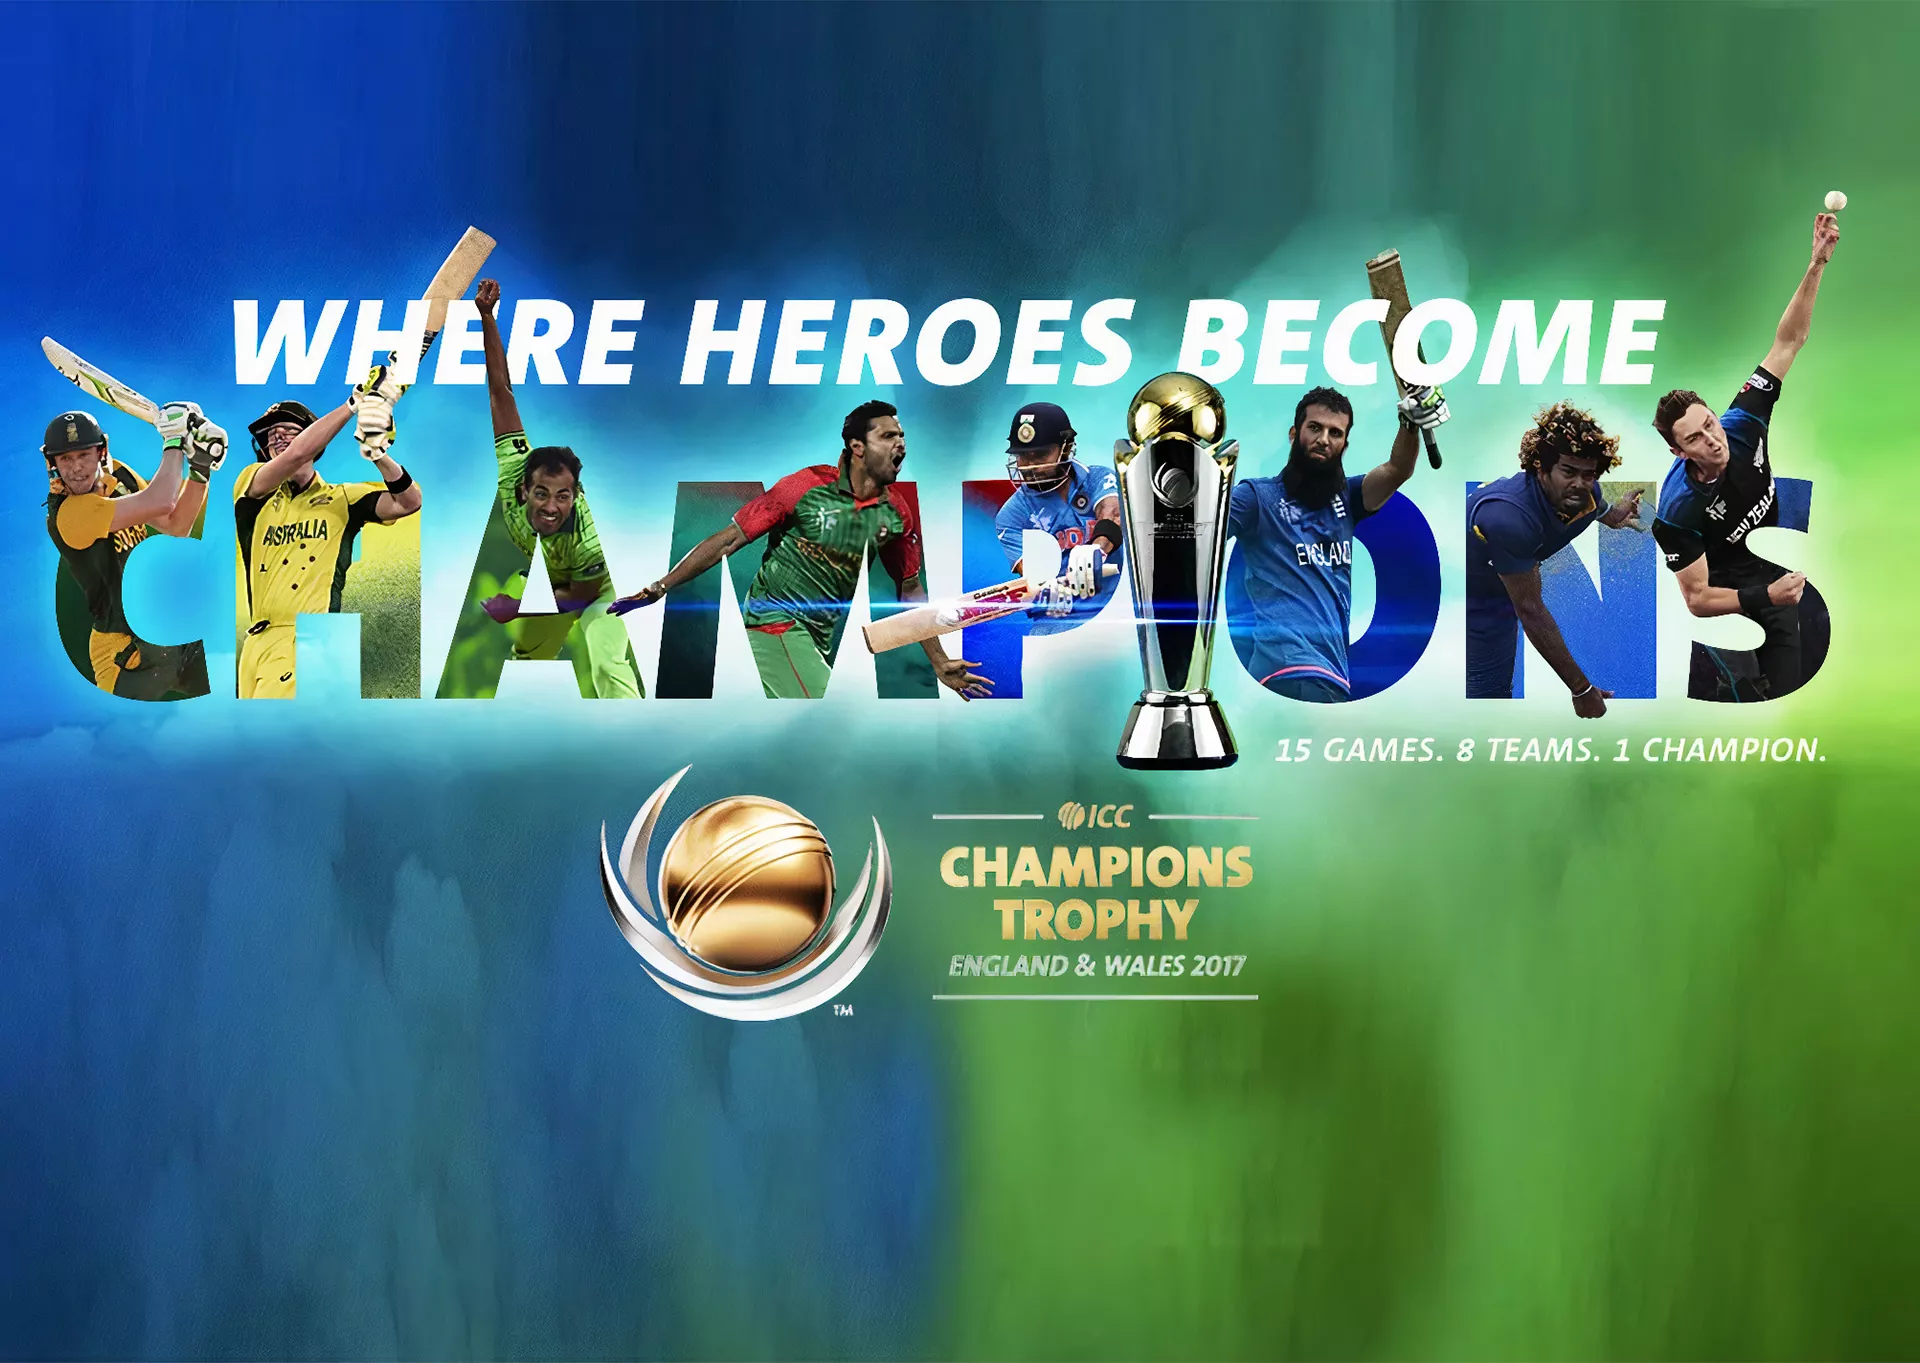 You can place bets on ICC Champions Trophy after registering on the site.